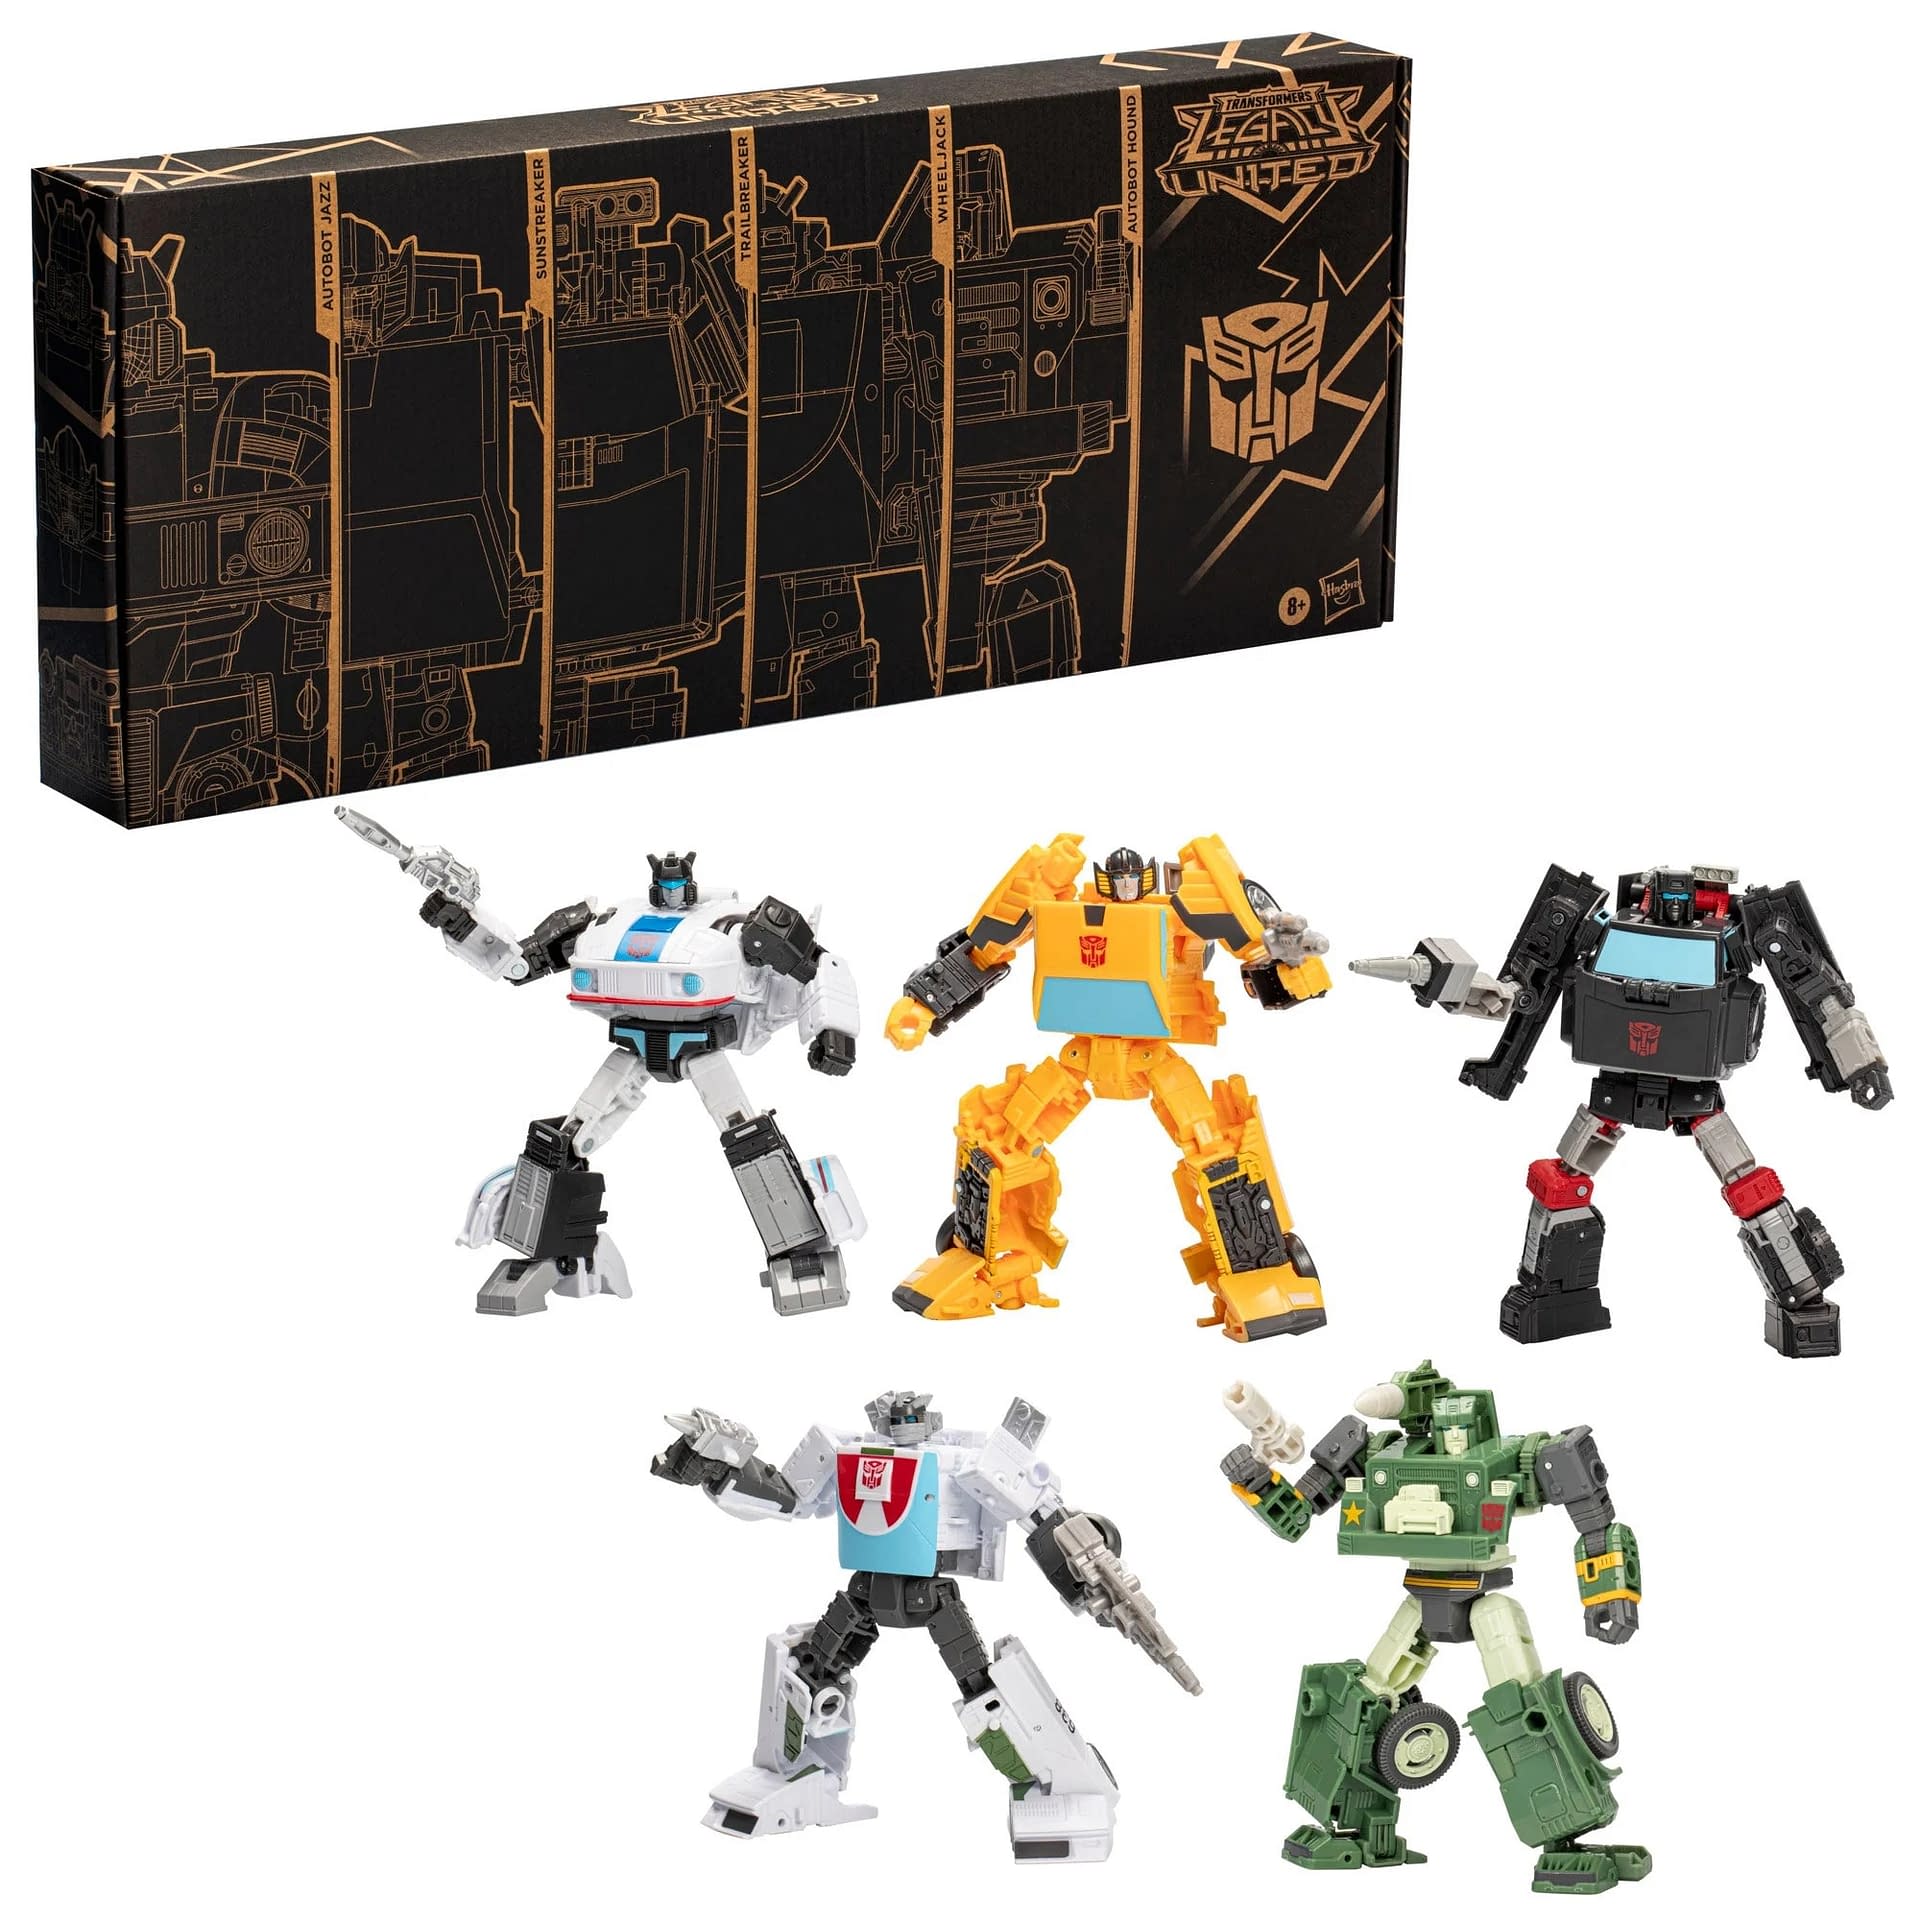 Transformers Autobots Stand United 5-Pack Coming Soon from Hasbro